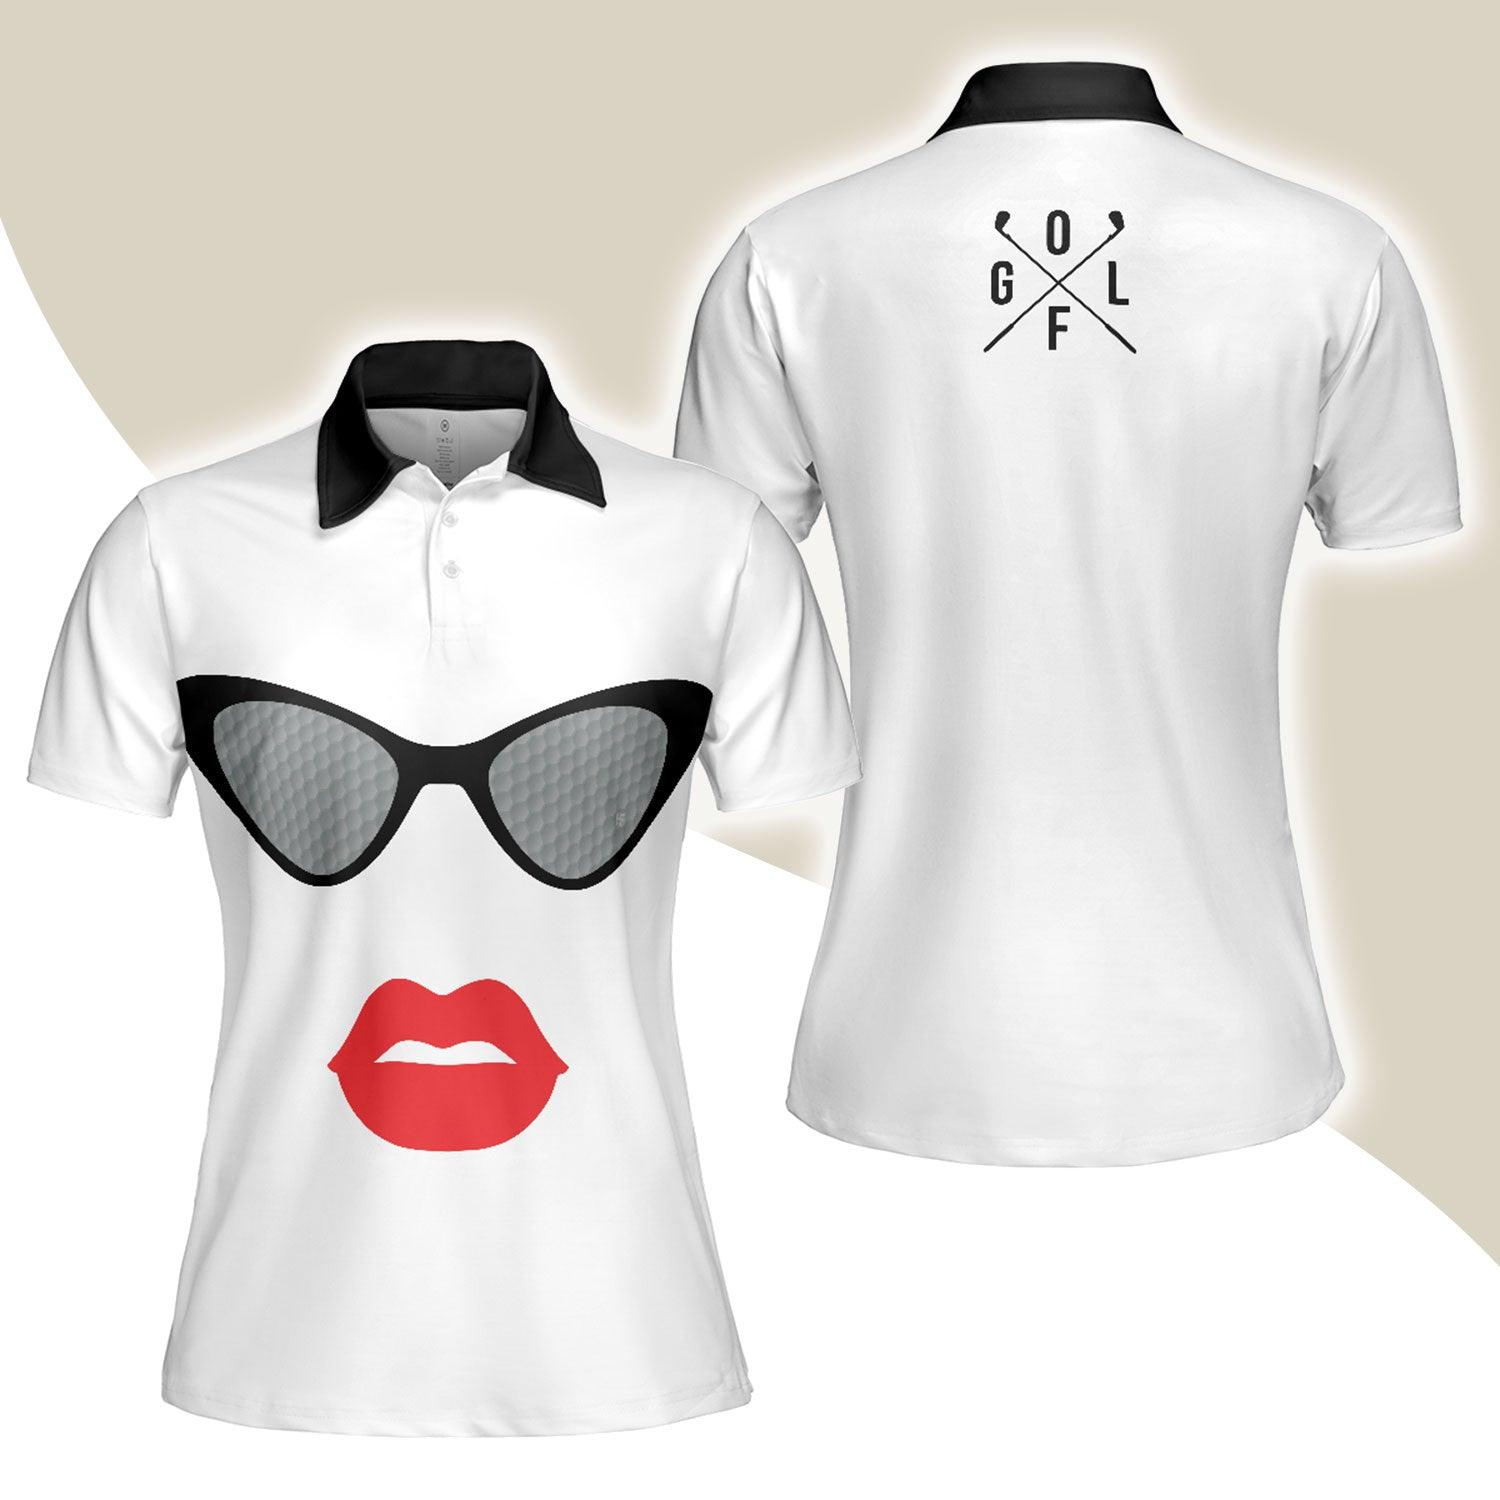 Golf Women Polo Shirt, Sunglasses And Sexy Red Lips Women Polo Shirts, Unique White Golf Shirt For Ladies, Perfect Gift For Golfers, Golf Lovers - Amzanimalsgift